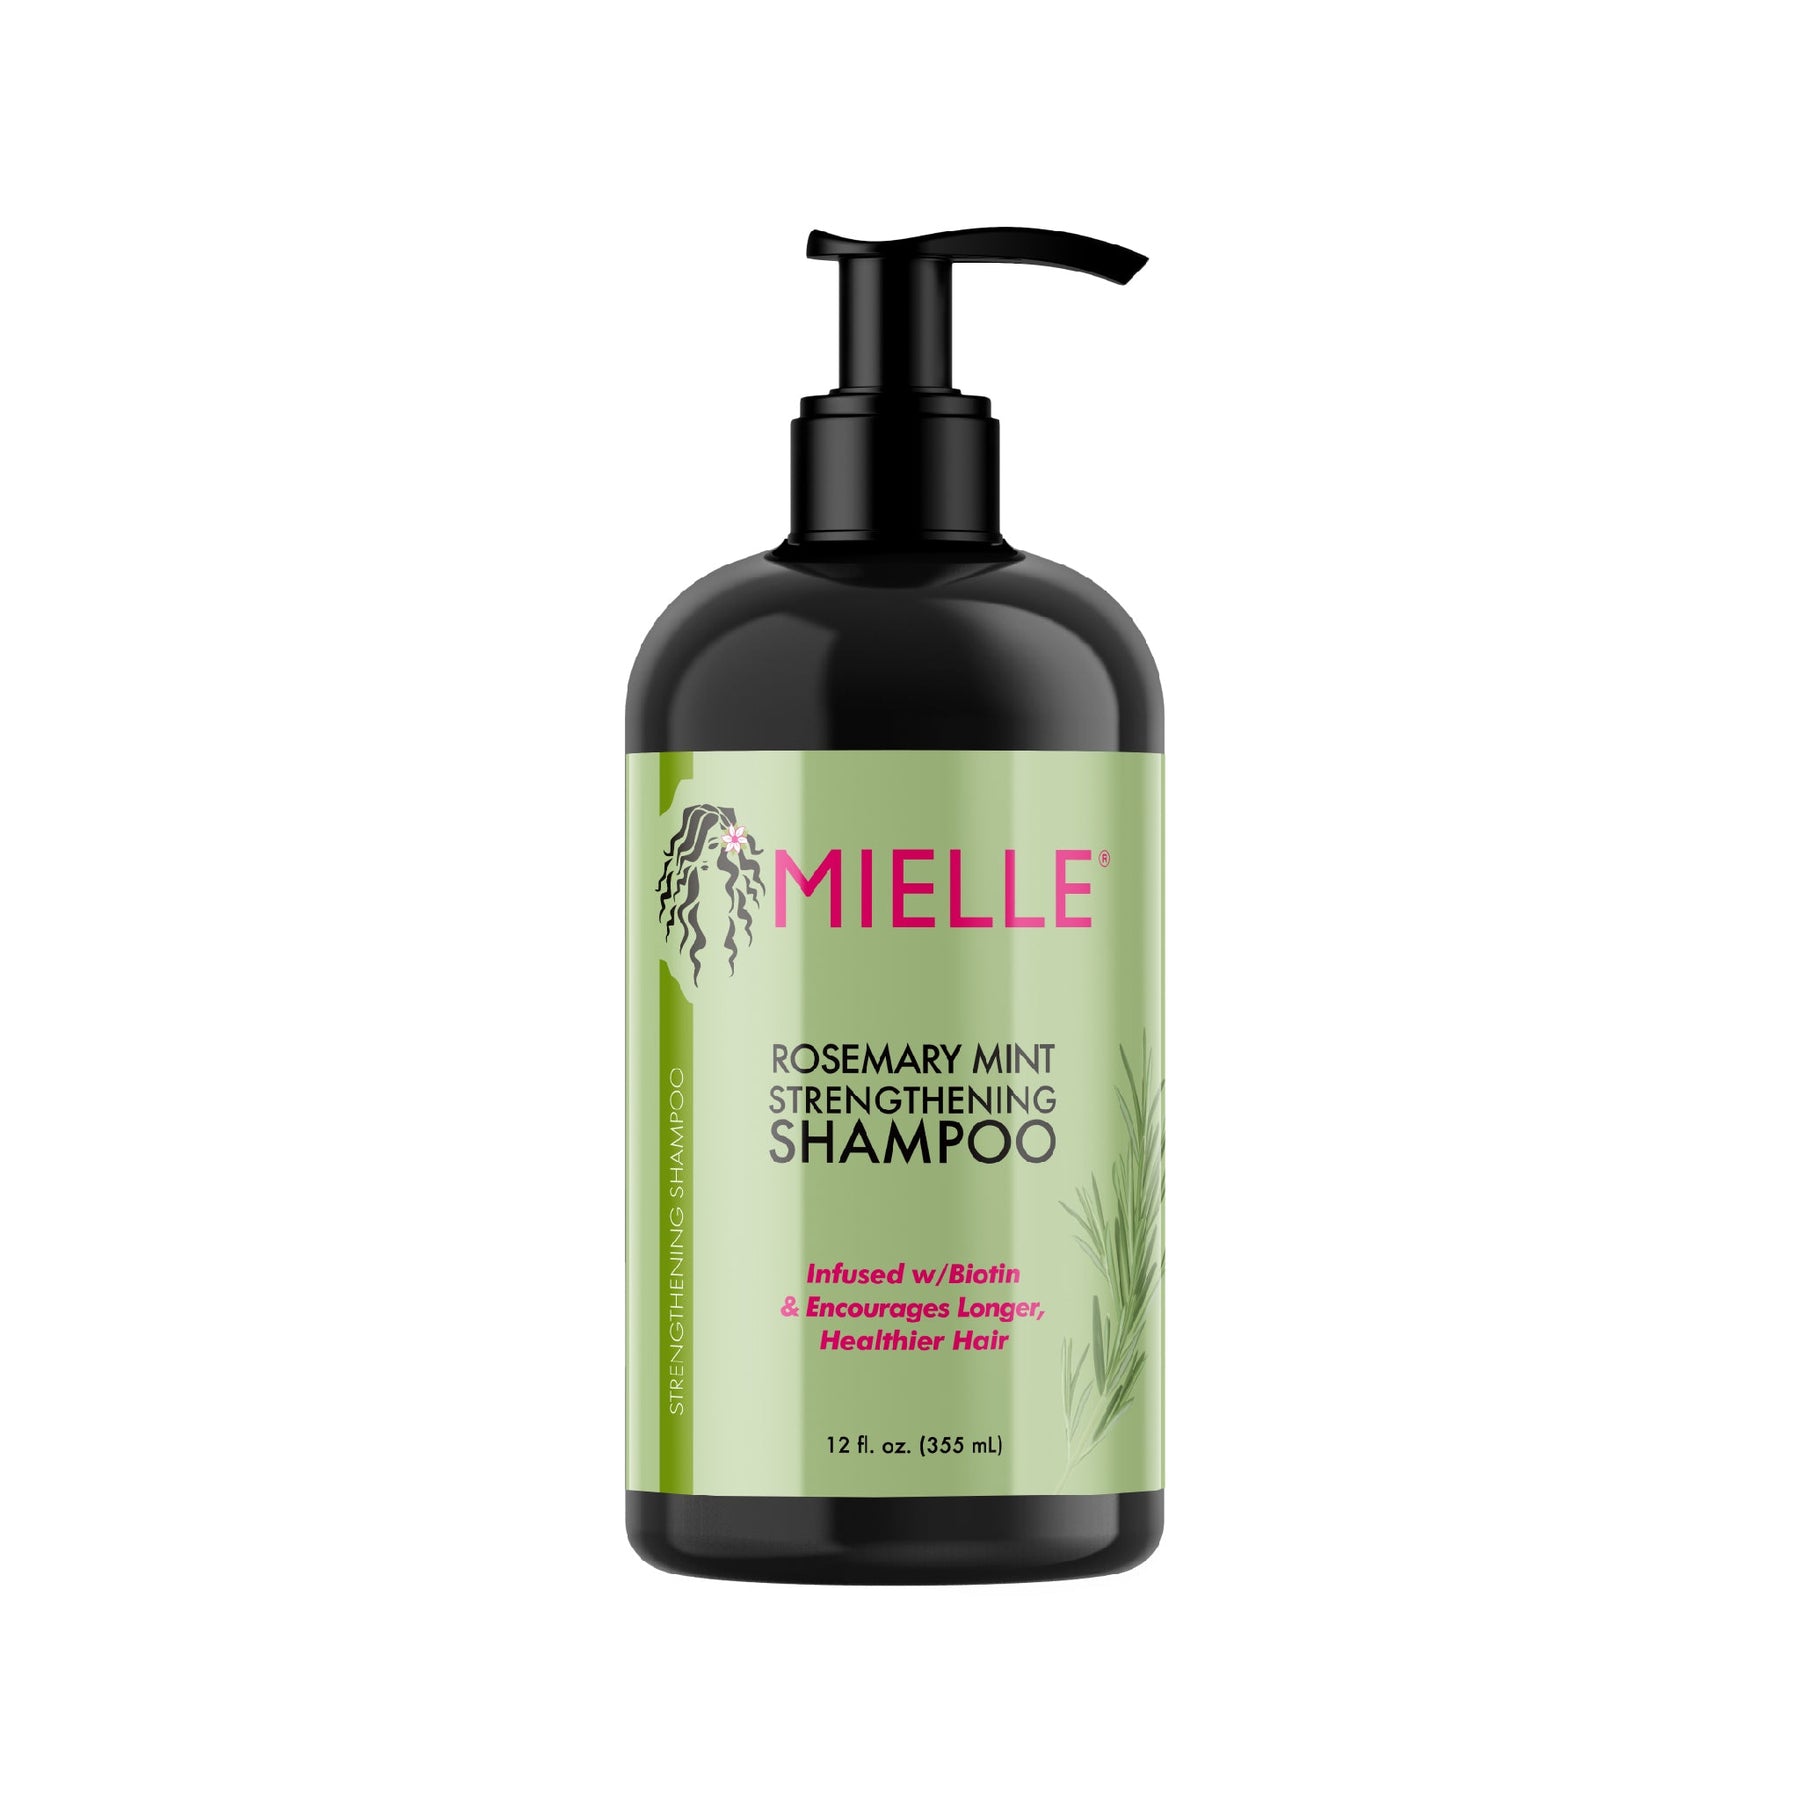 MIELLE SHAMPOOING FORTIFIANT ROSEMARY MINT